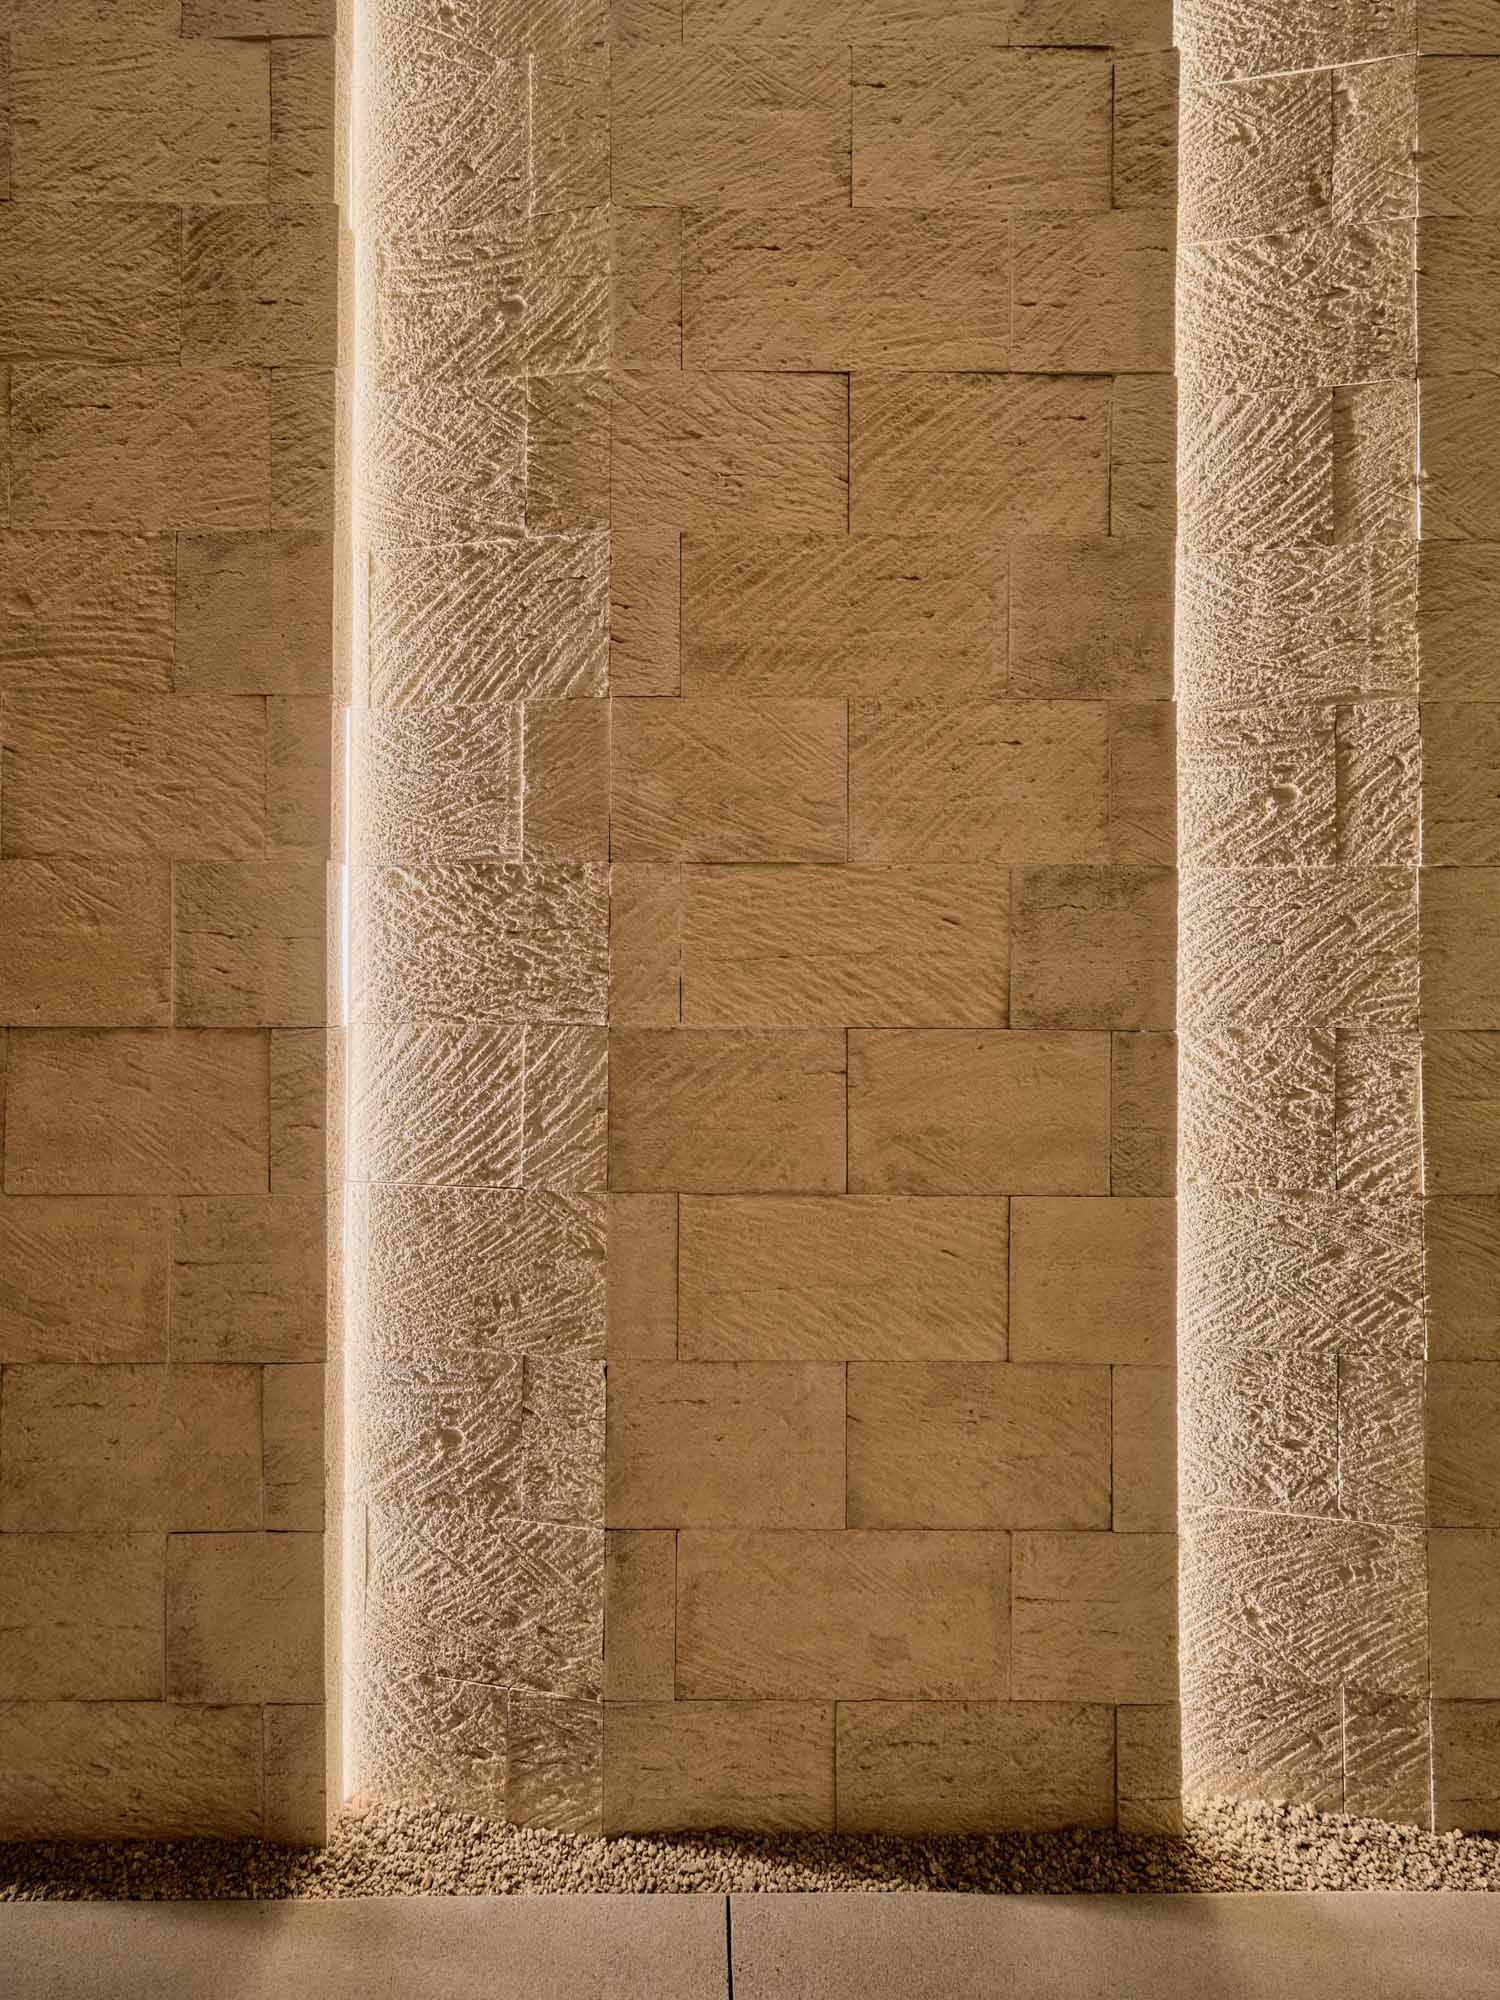 Lighting has been include between stone walls at the entryway of this modern desert home.